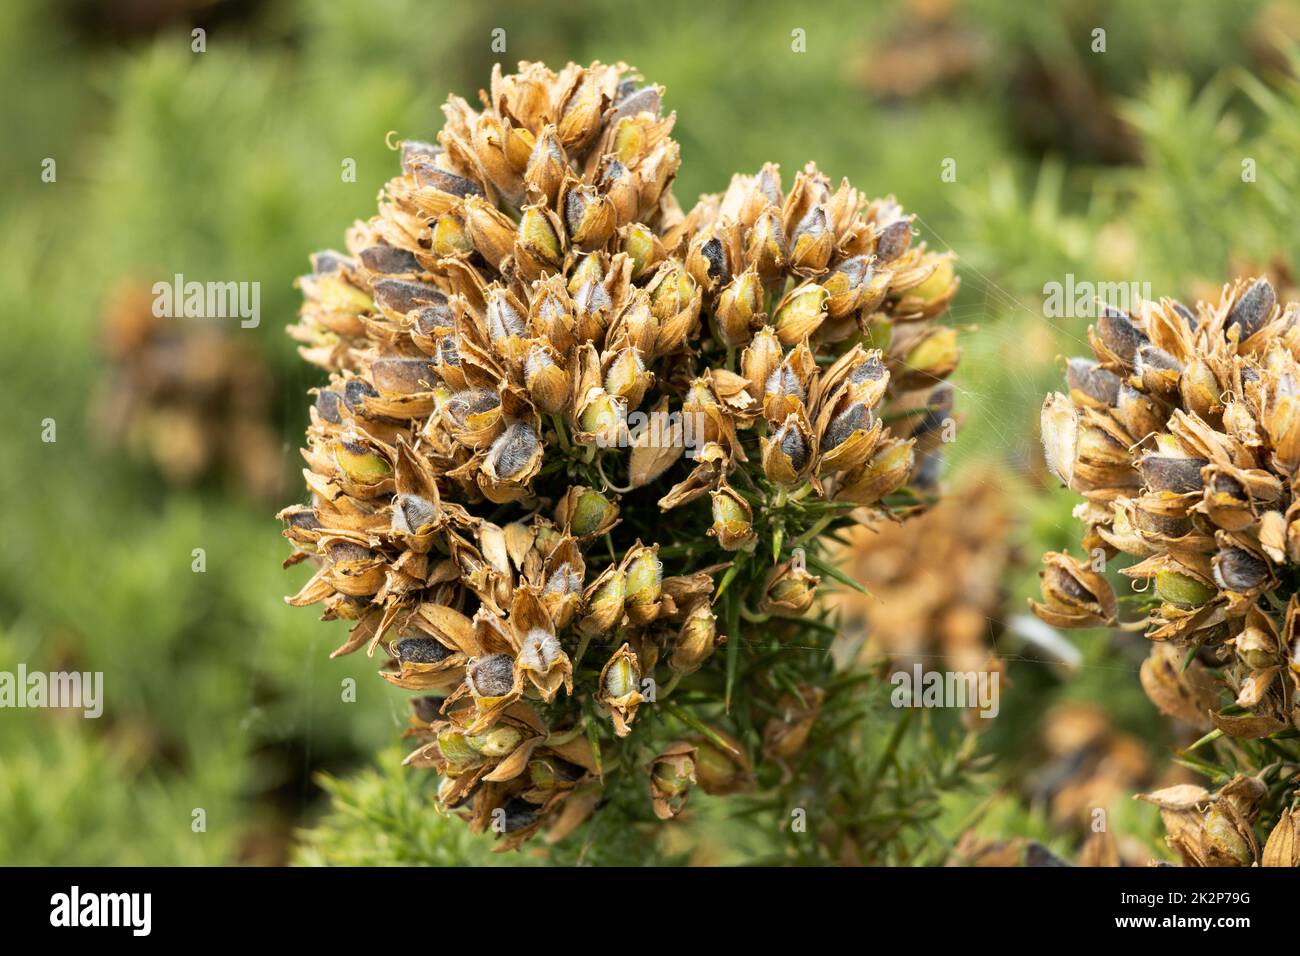 On warm dry summer days, the sound of Gorse seed pods popping open sounds just like the breakfast cereal that goes snap, crackle and pop. Stock Photo